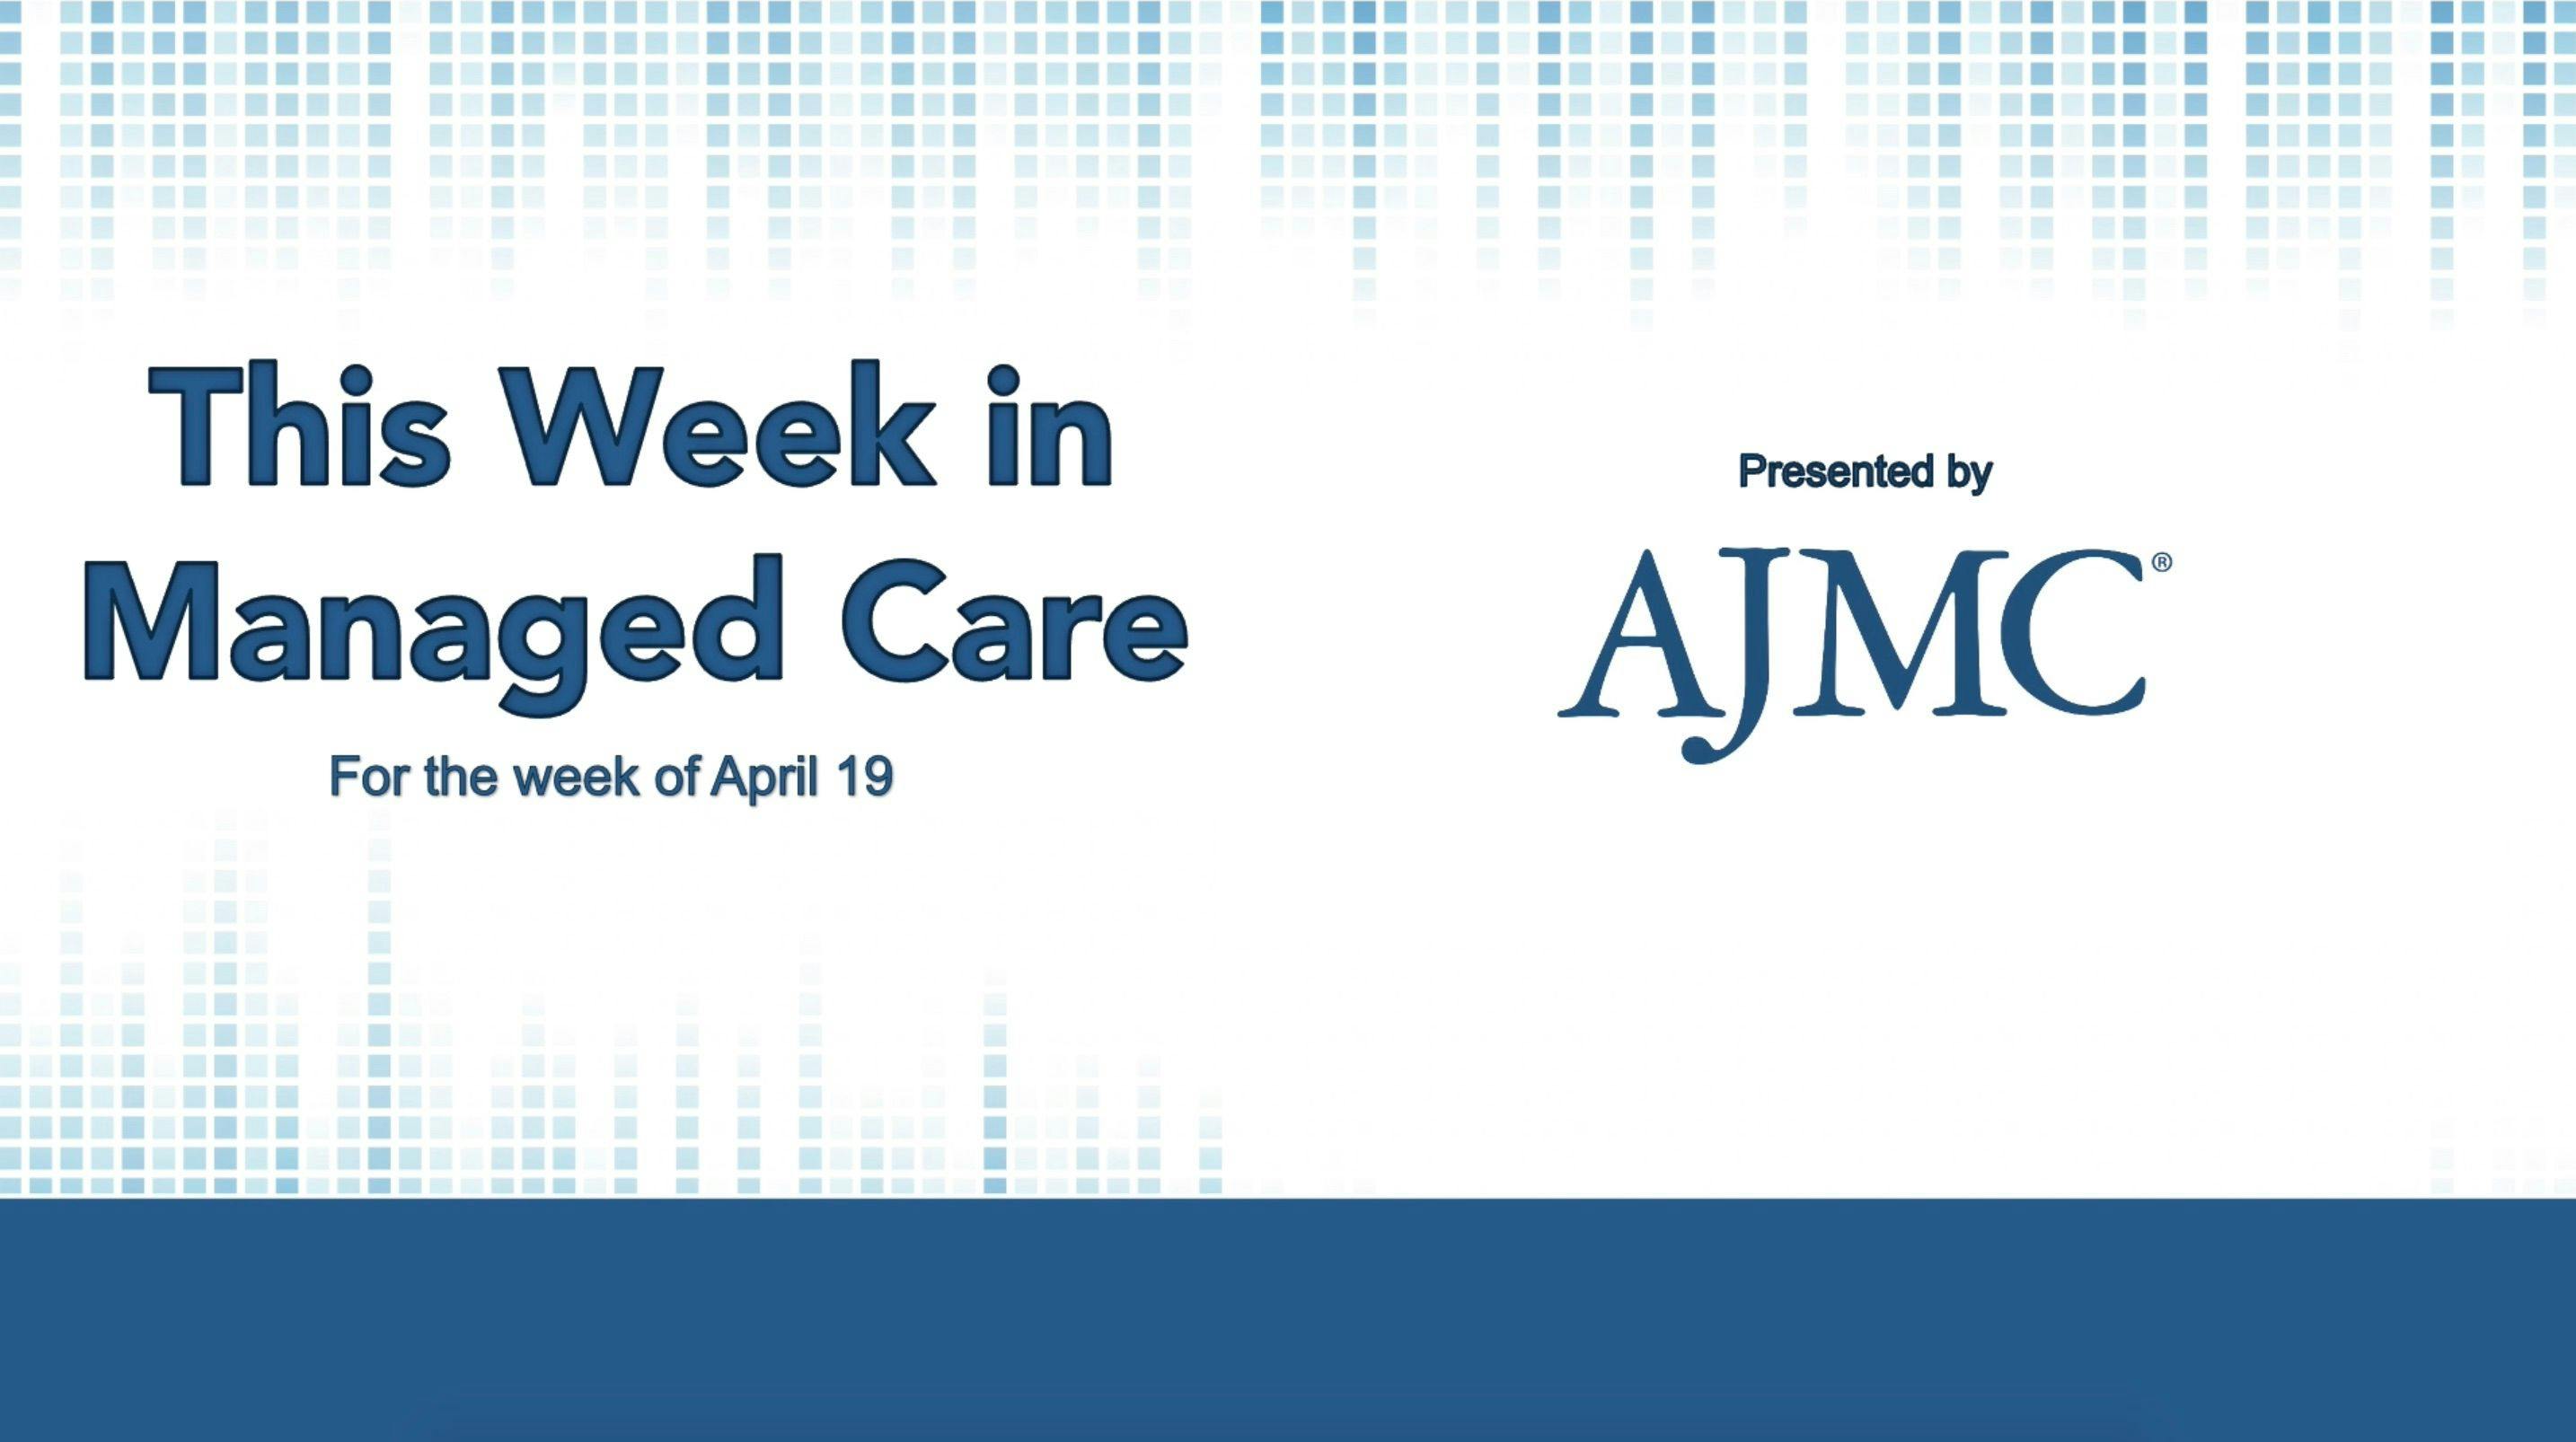 This Week in Managed Care: April 23, 2021